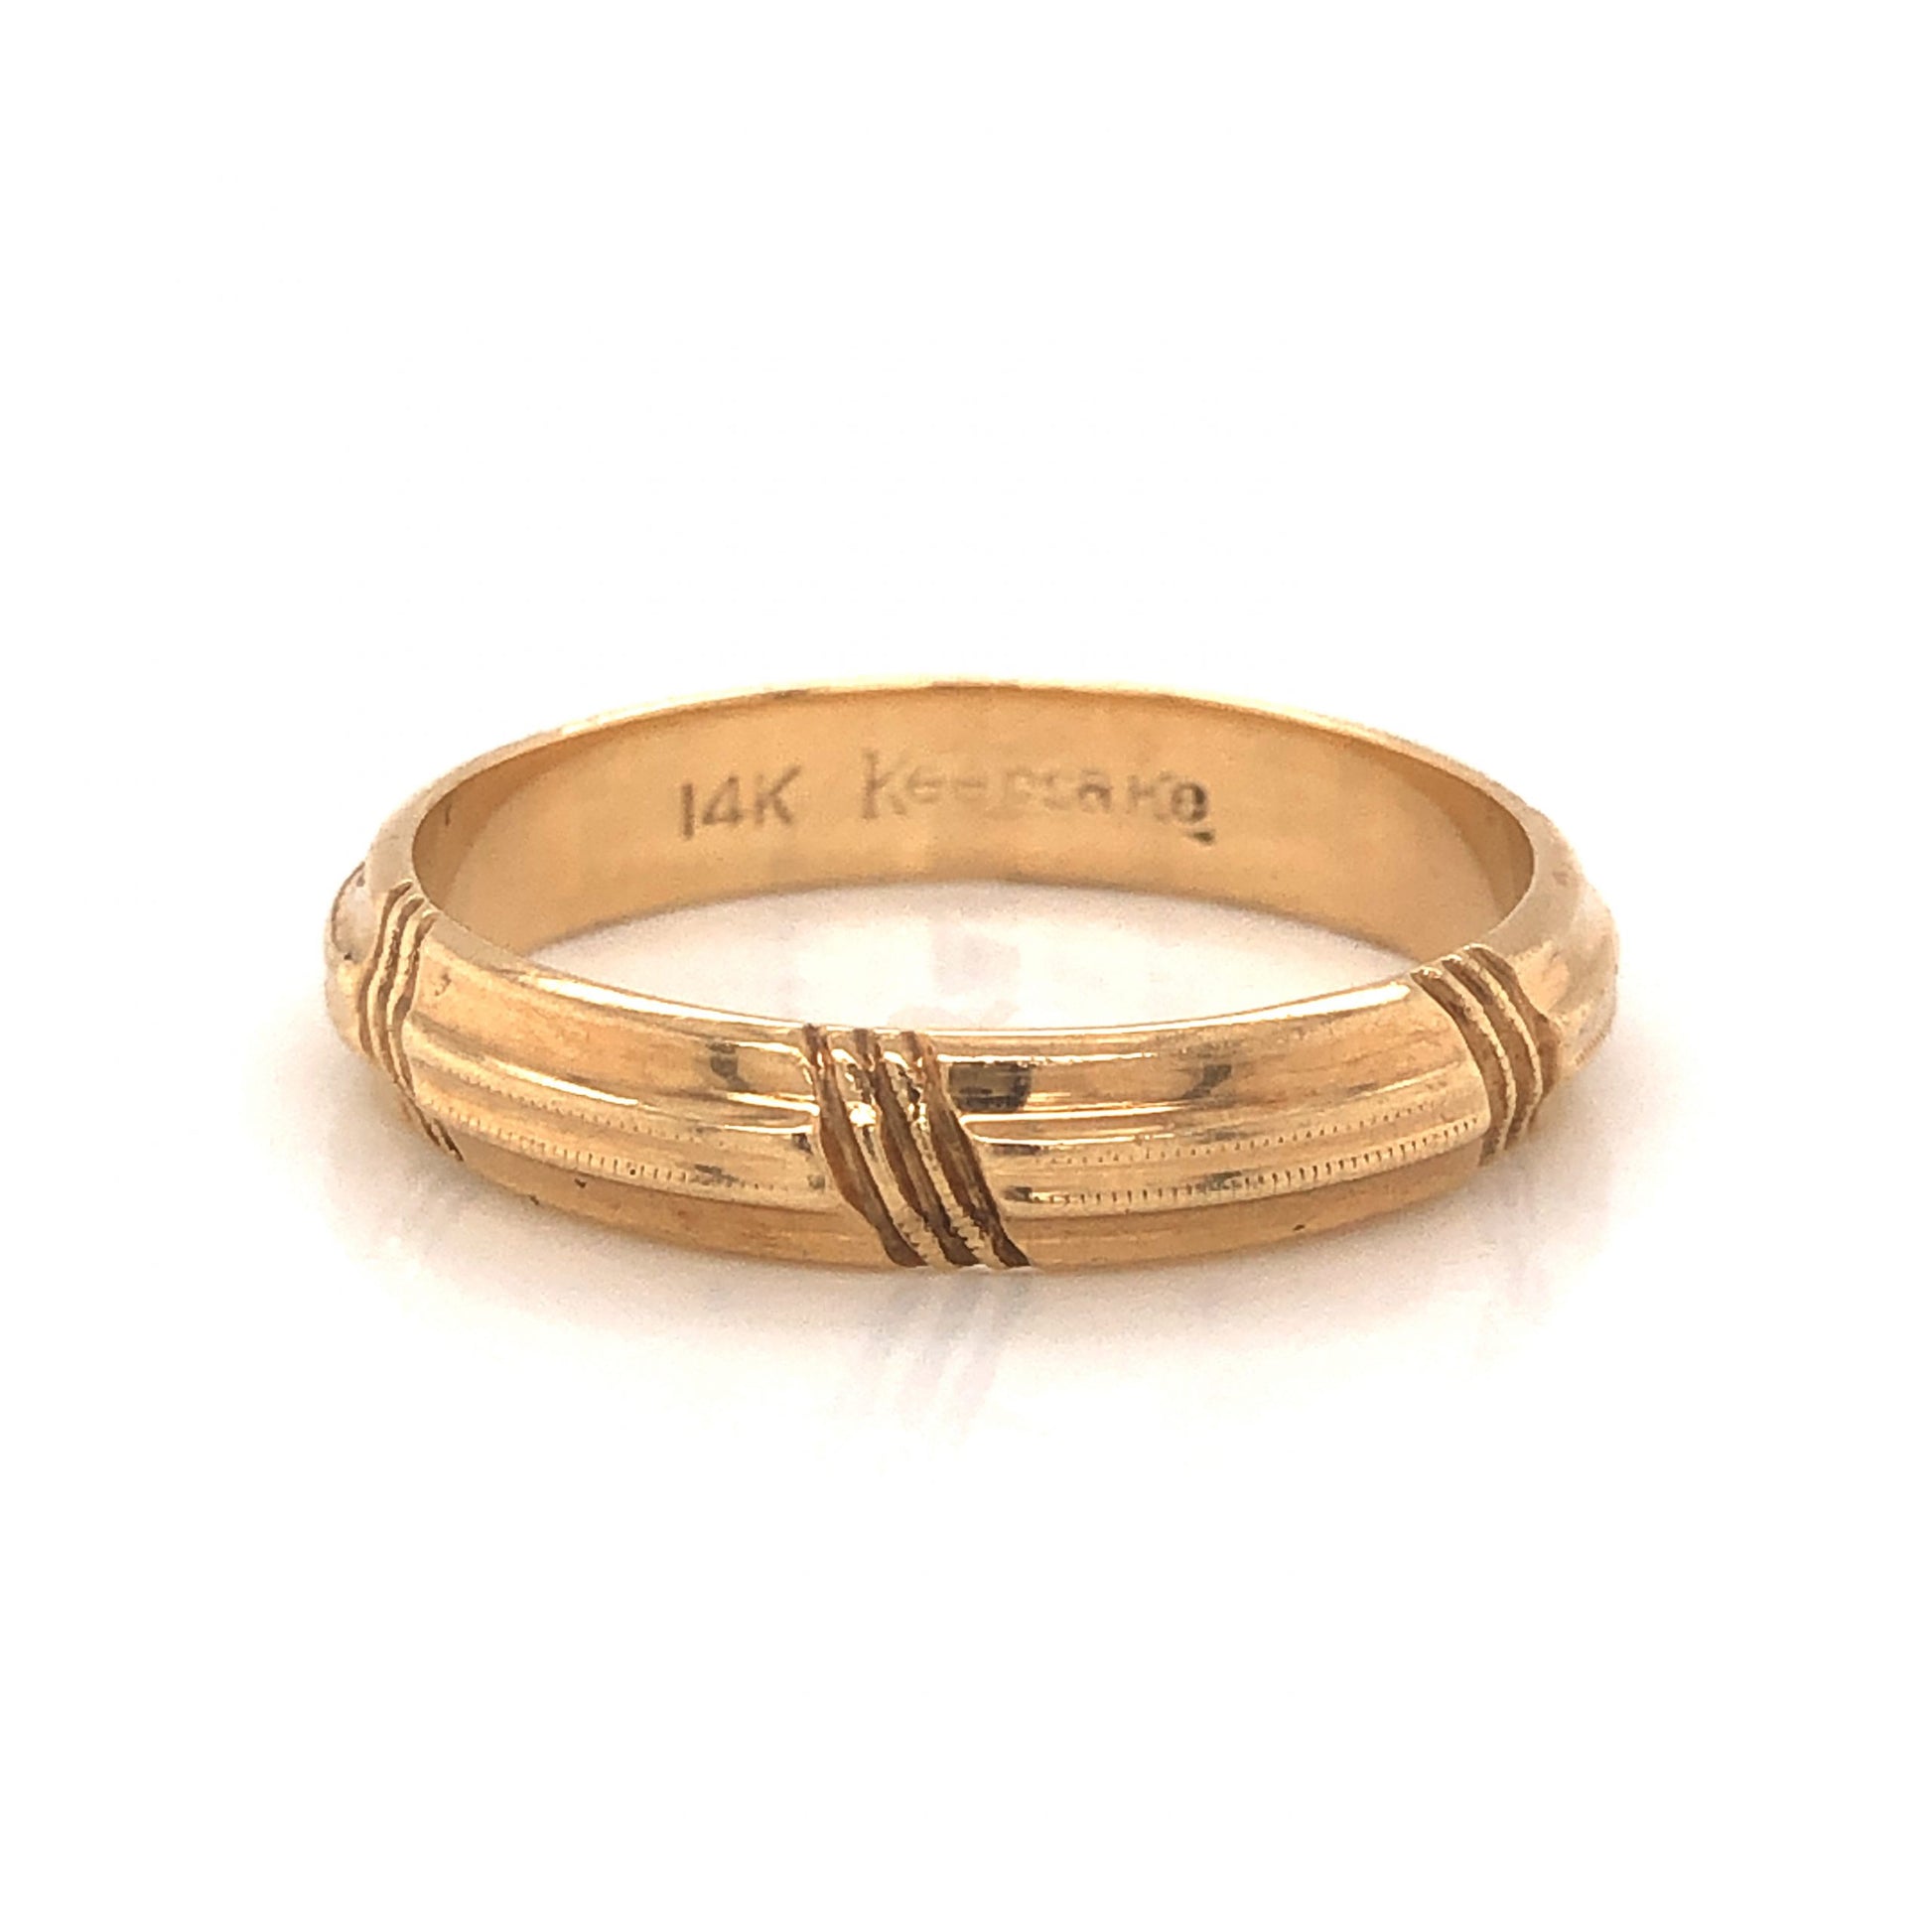 Men's Vintage Textured Wedding Band in 14k Yellow GoldComposition: 14 Karat Yellow Gold Ring Size: 11 Total Gram Weight: 4.5 g Inscription: 14k
      